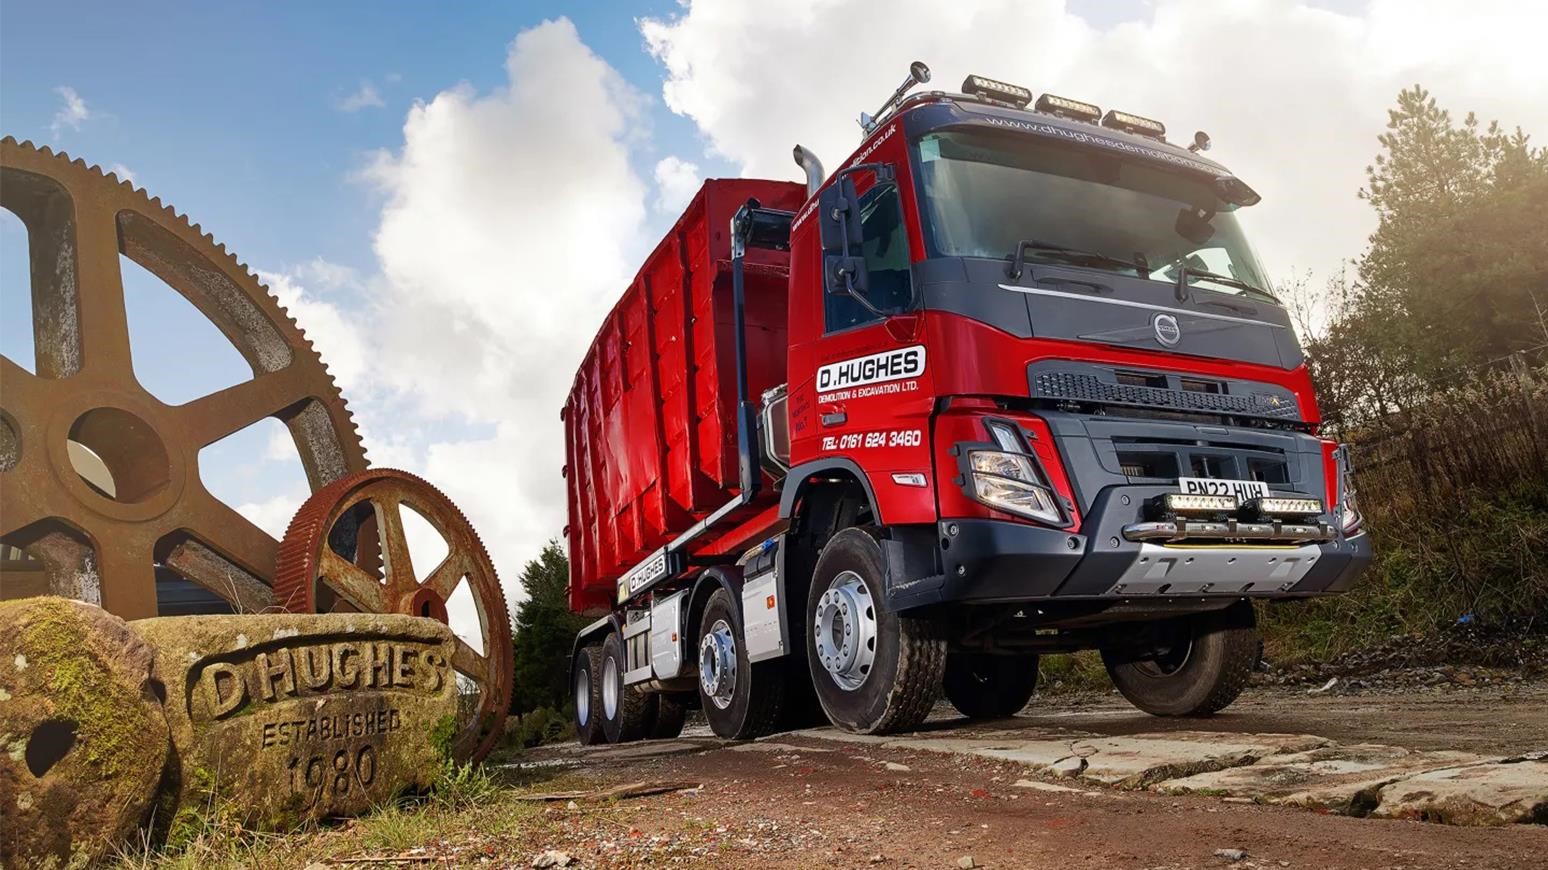 D Hughes Demolition Replaces Ageing Volvo FMX 500 With FMX 420 8x4 Rigid